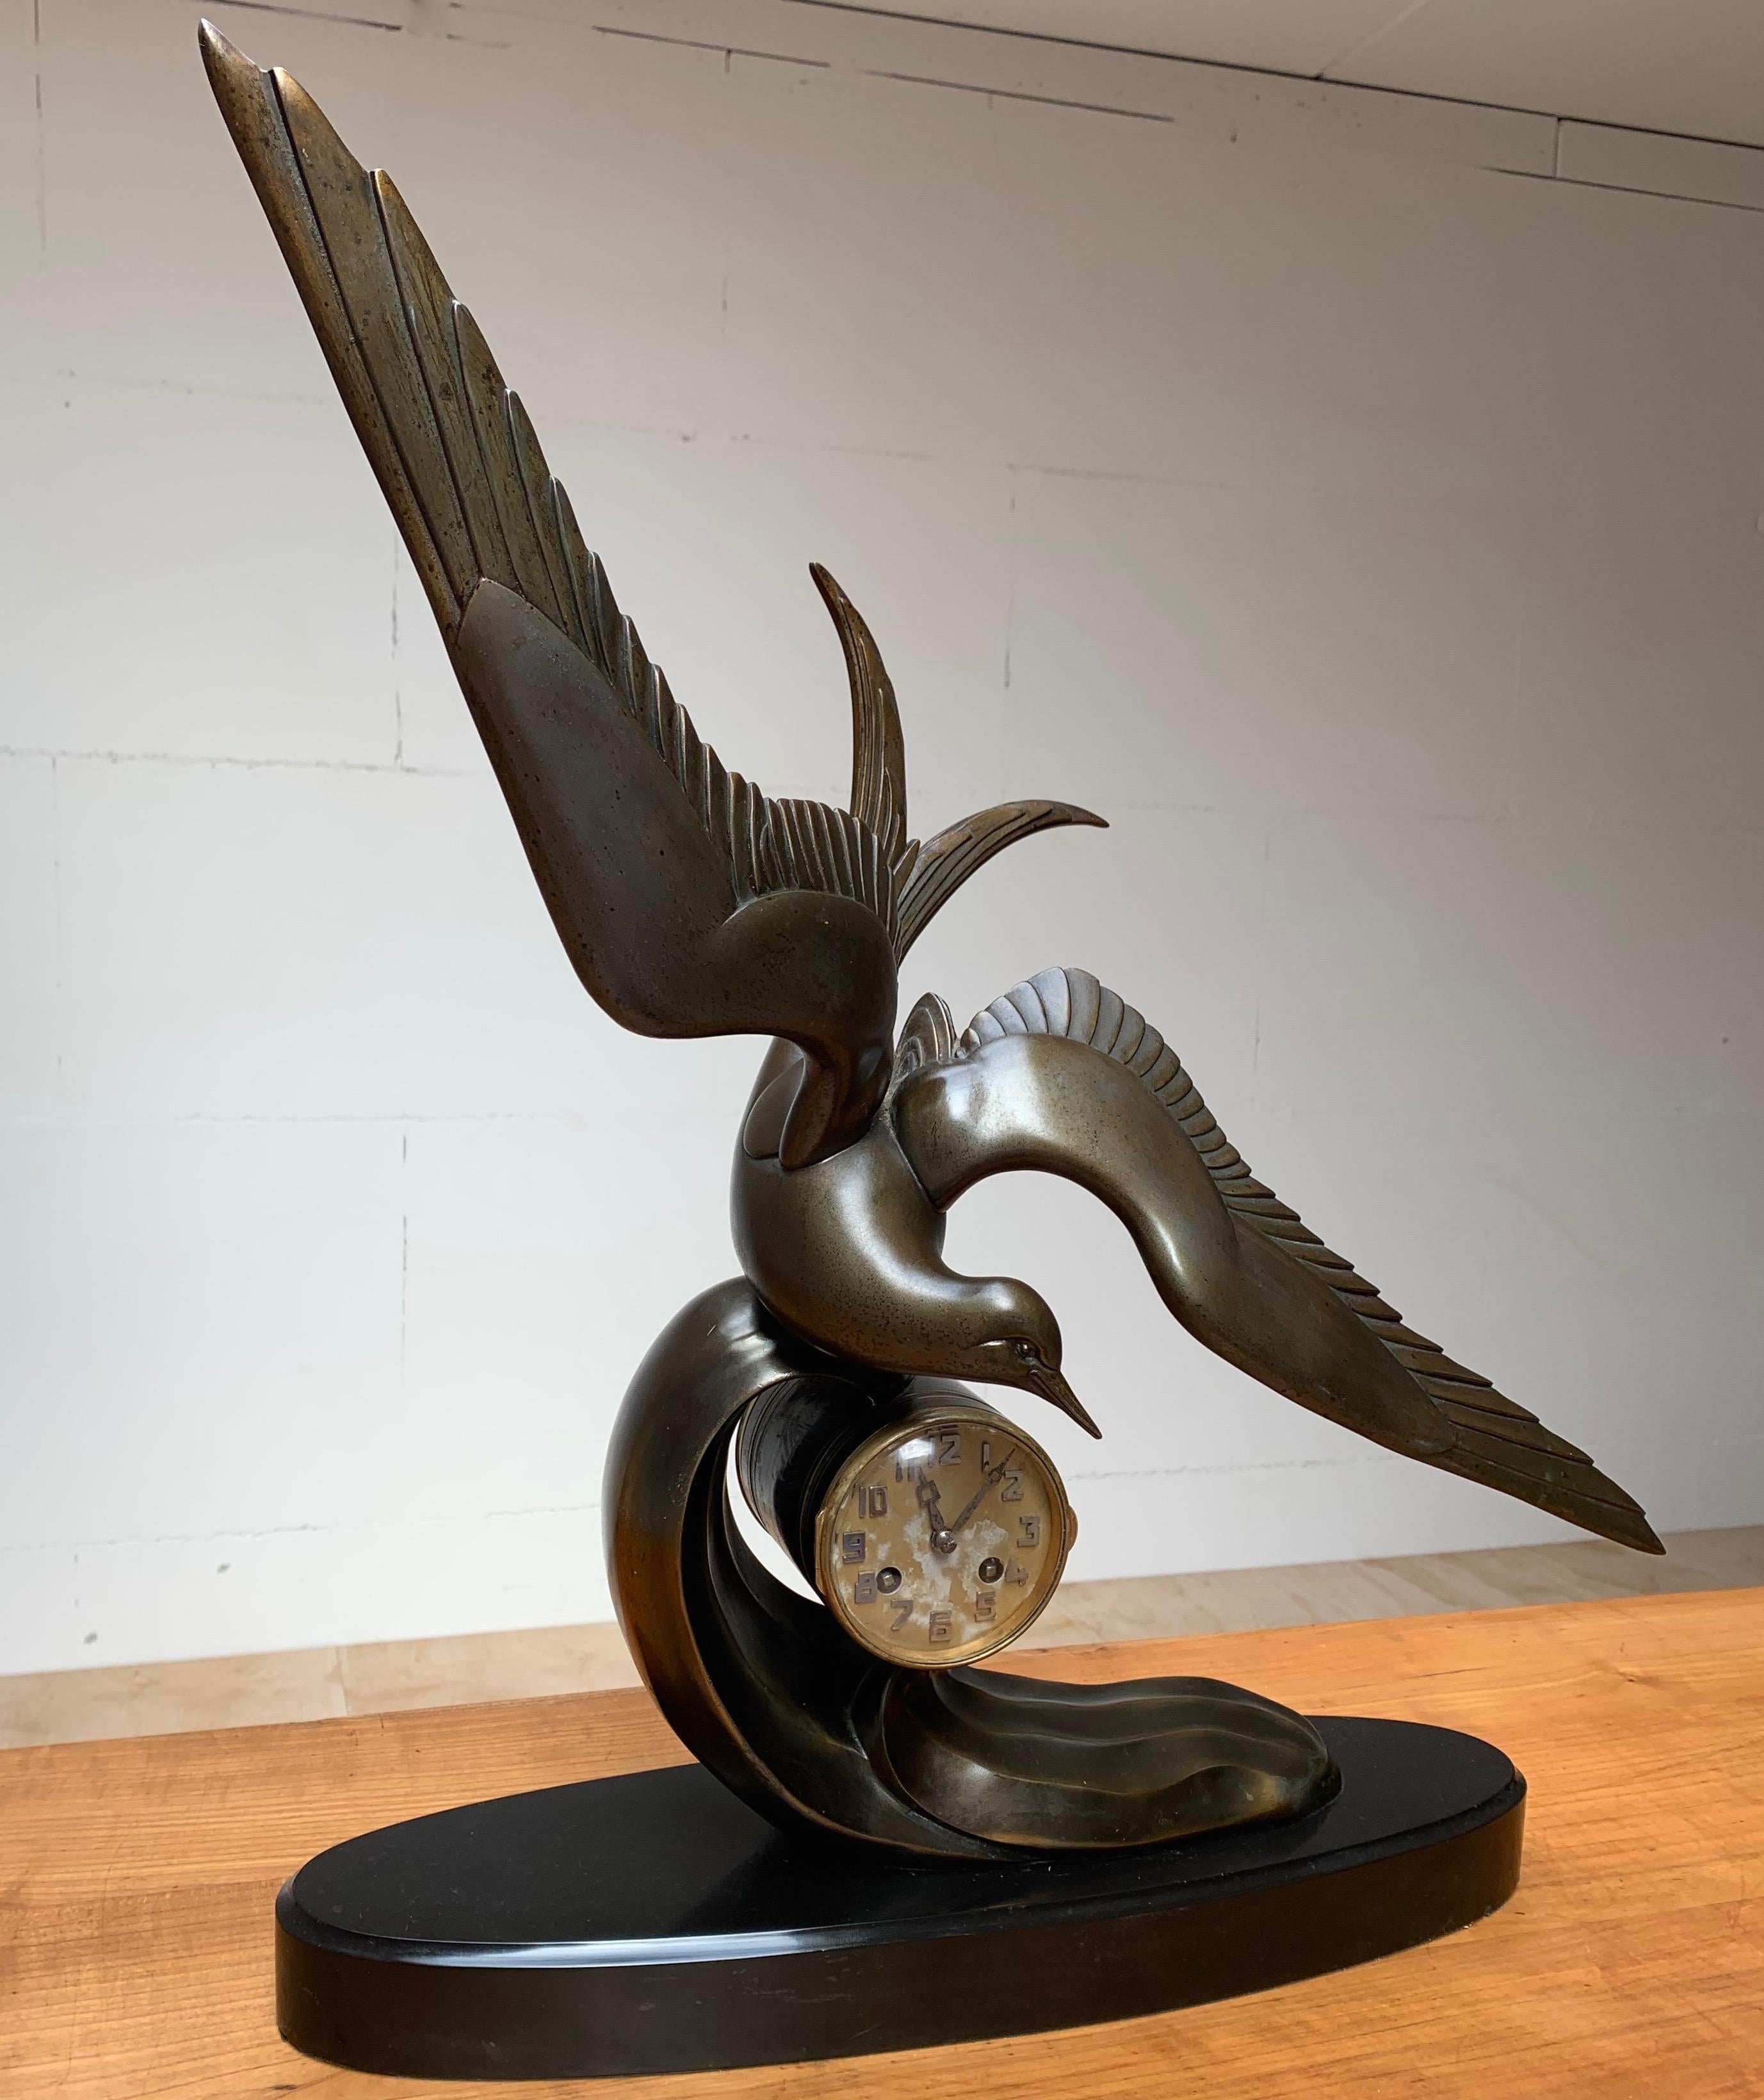 French Graceful Art Deco Table / Mantel Clock w Large Stylized Swallow Bird Sculpture For Sale